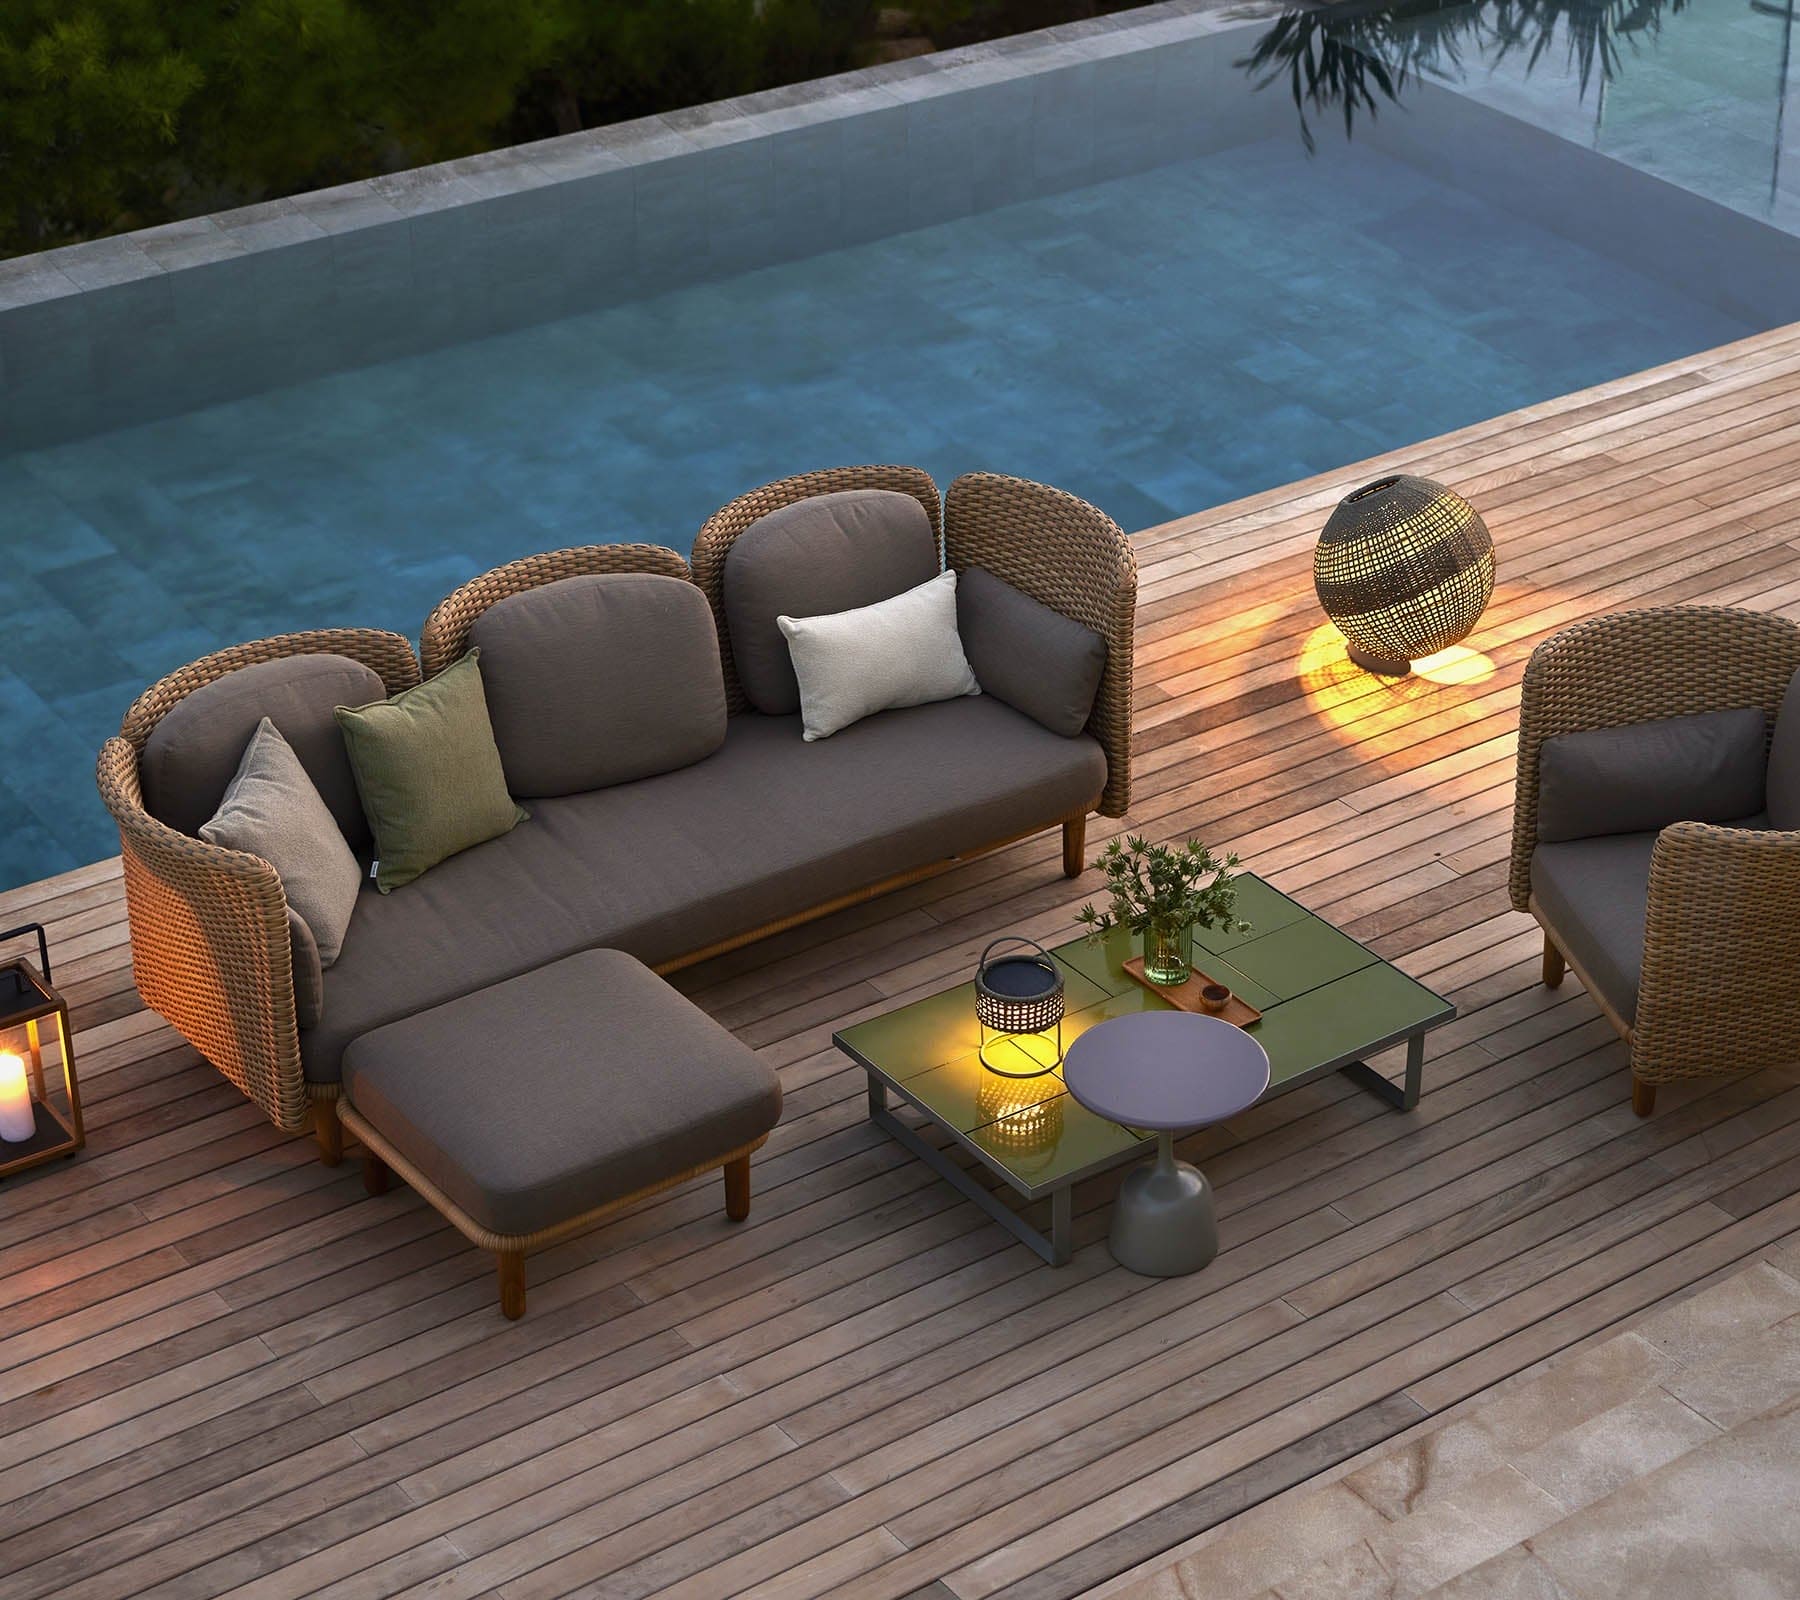 Boxhill's Glaze Outdoor Rectangular Coffee Table lifestyle image with 3 seater sofa, single module sofa and lounge chair on wooden platform poolside